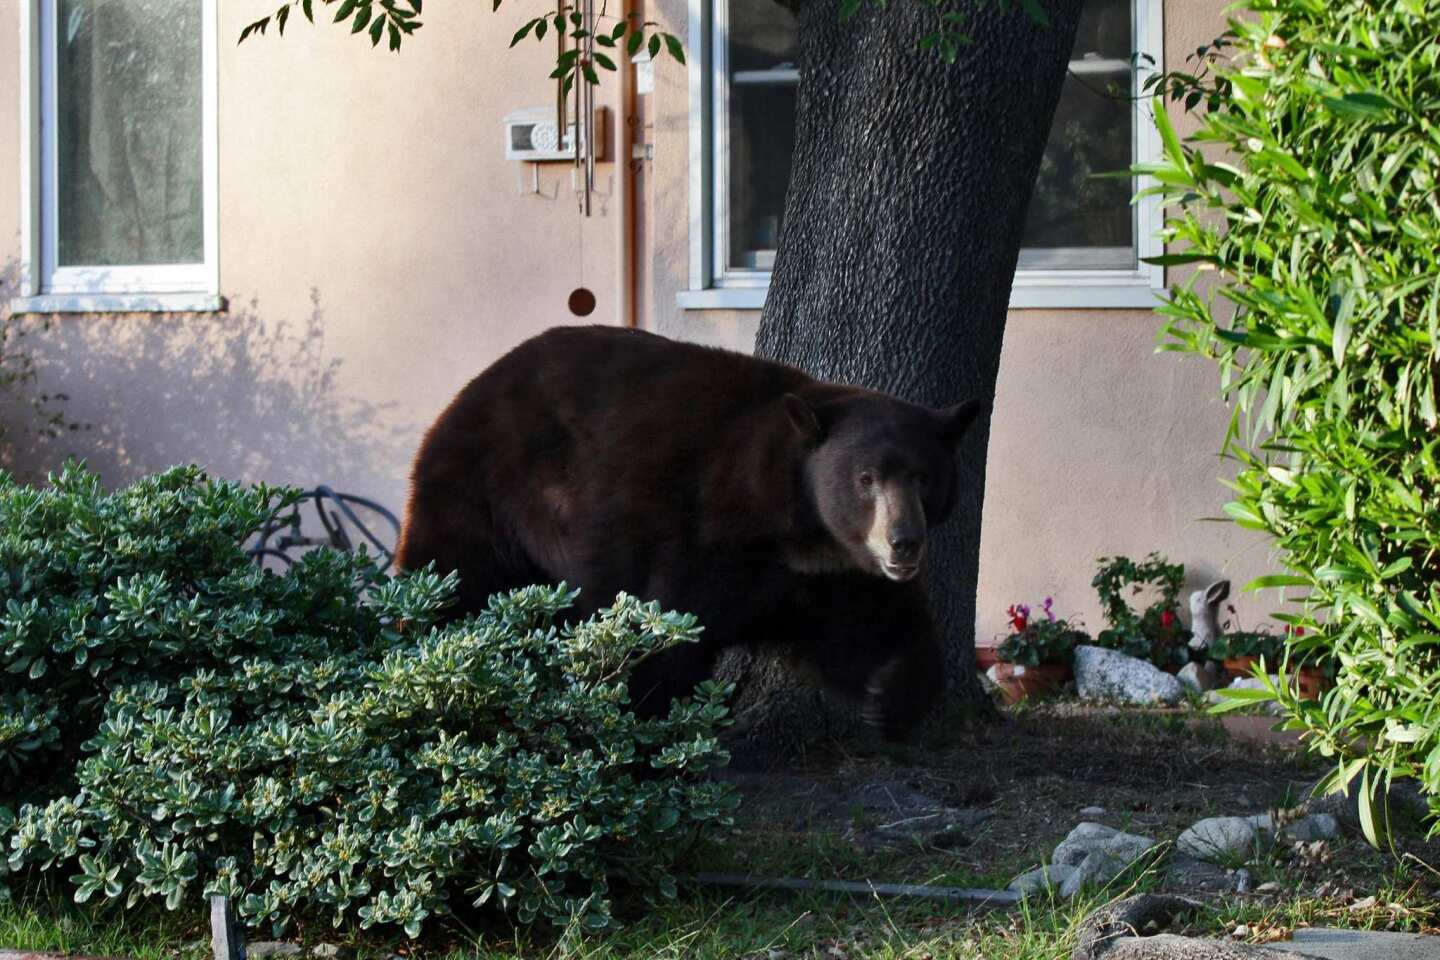 A 400-pound black bear known as Glen Bearian, or Meatball, visited the Glendale area three times in 2012 to plunder trash cans and play cat-and-mouse with the authorities, who twice returned him to his home in the Angeles National Forest. The next stop? It was to be a wildlife sanctuary in Colorado, but now his current caretakers at a San Diego County sanctuary are making plans to build him a permanent home. More: "I looked out the window, and he was standing there, 5 feet away"